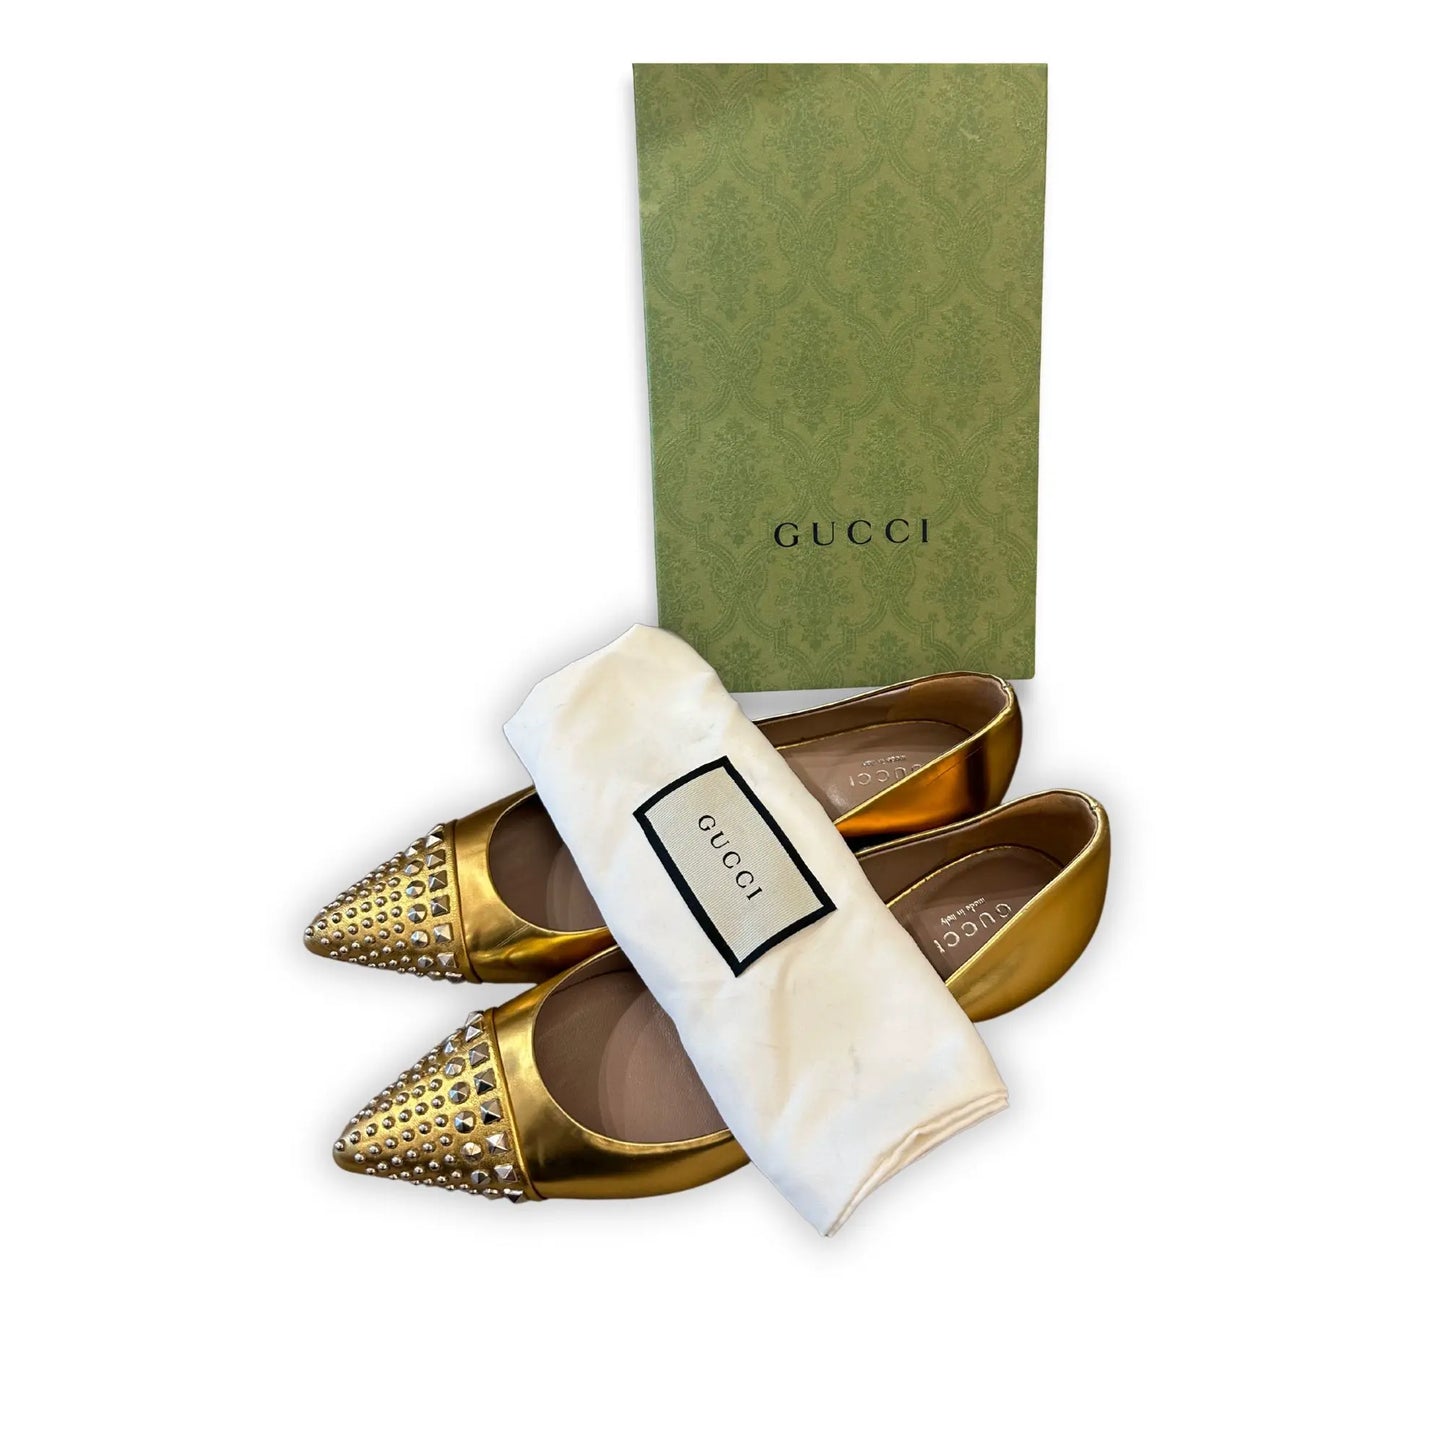 GUCCI GOLD LEATHER BALLET FLATS